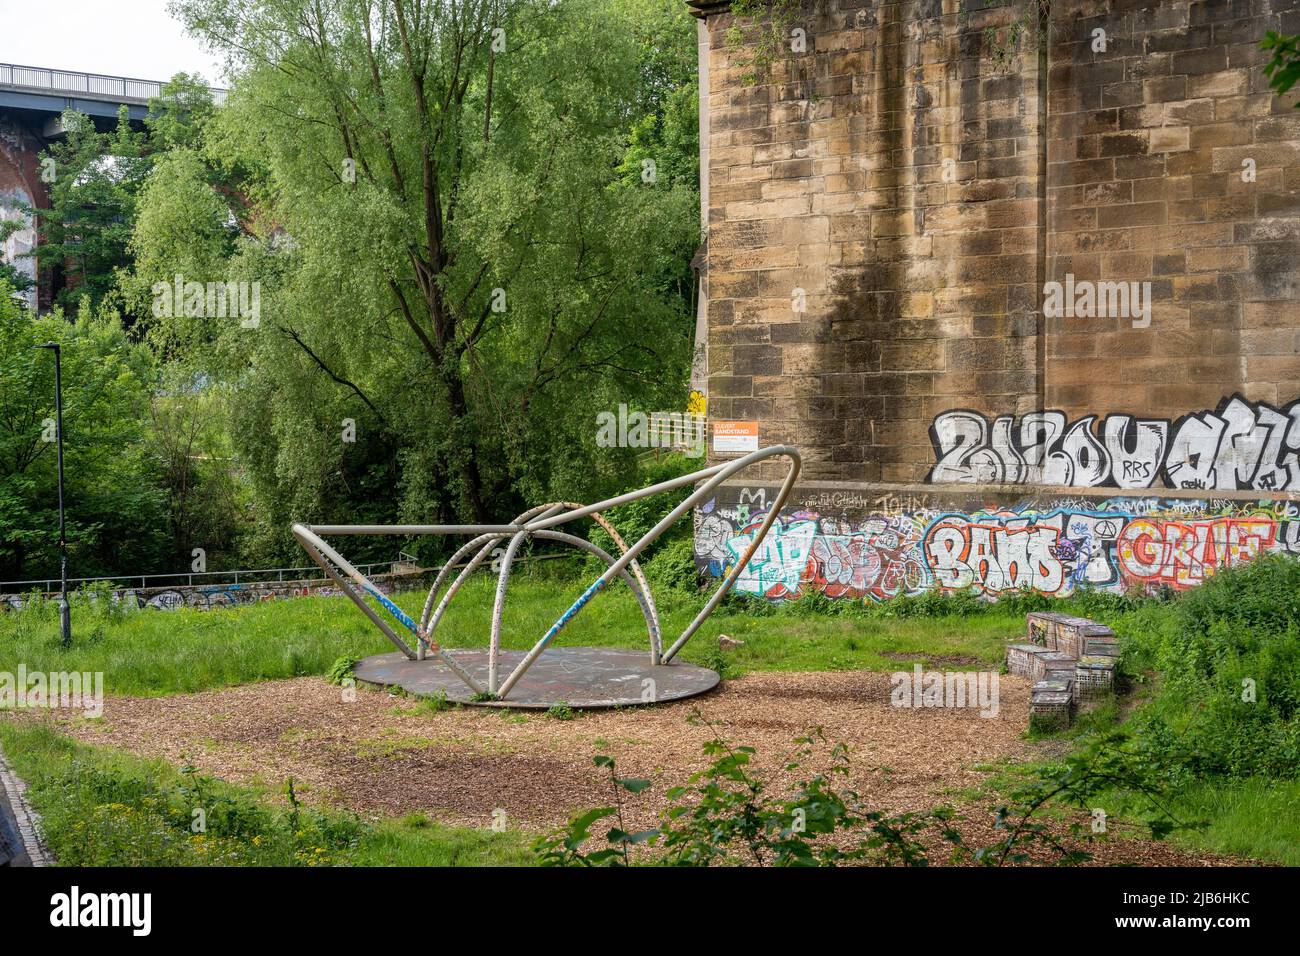 The Ouseburn Bandstand tucked away in the valley under a bridge in Newcastle upon Tyne, UK. Stock Photo